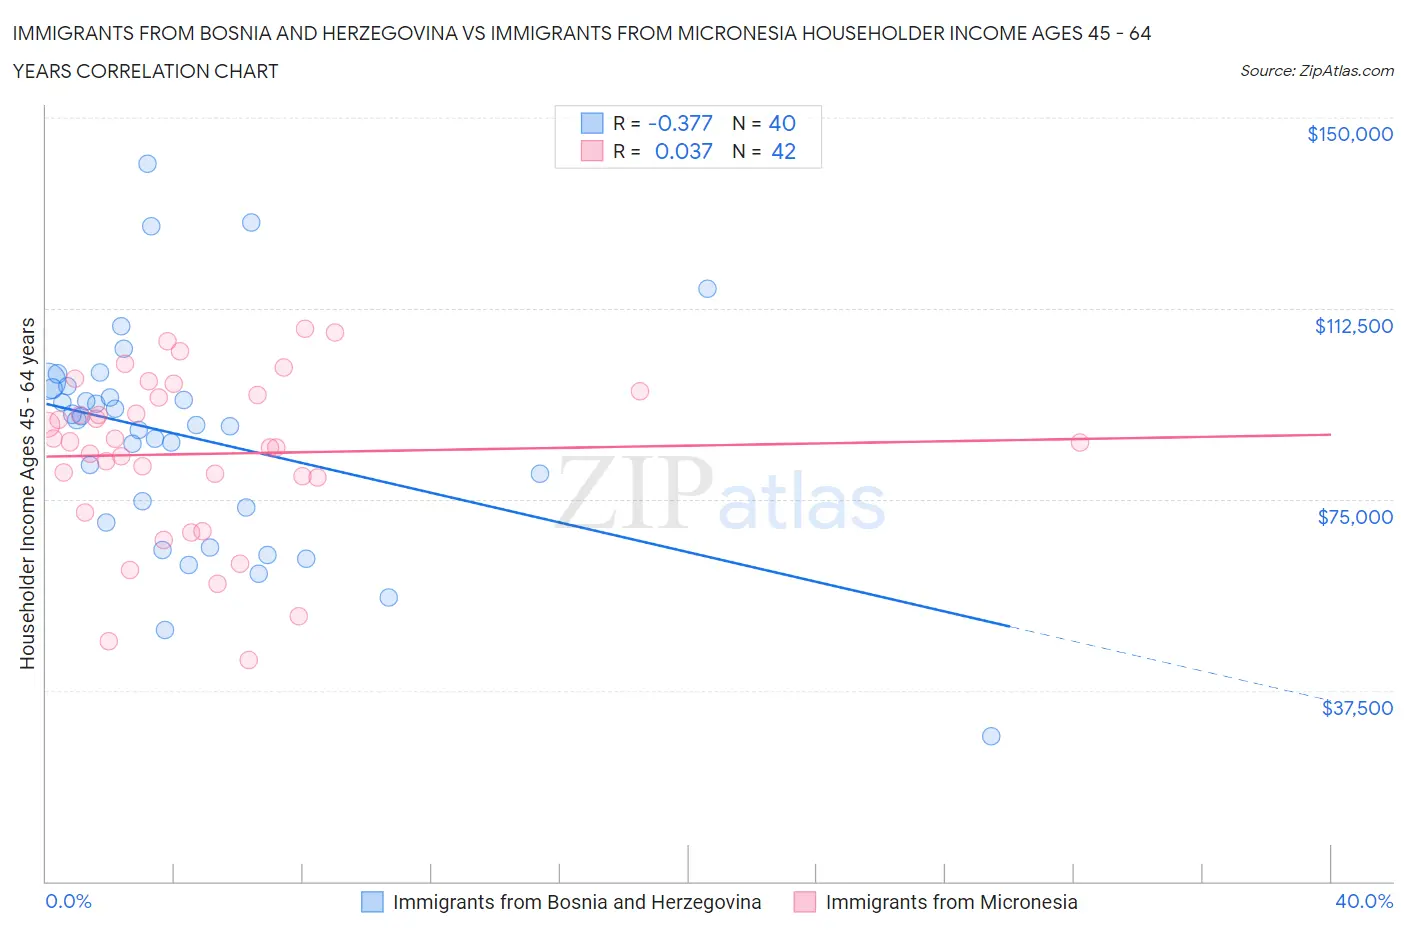 Immigrants from Bosnia and Herzegovina vs Immigrants from Micronesia Householder Income Ages 45 - 64 years